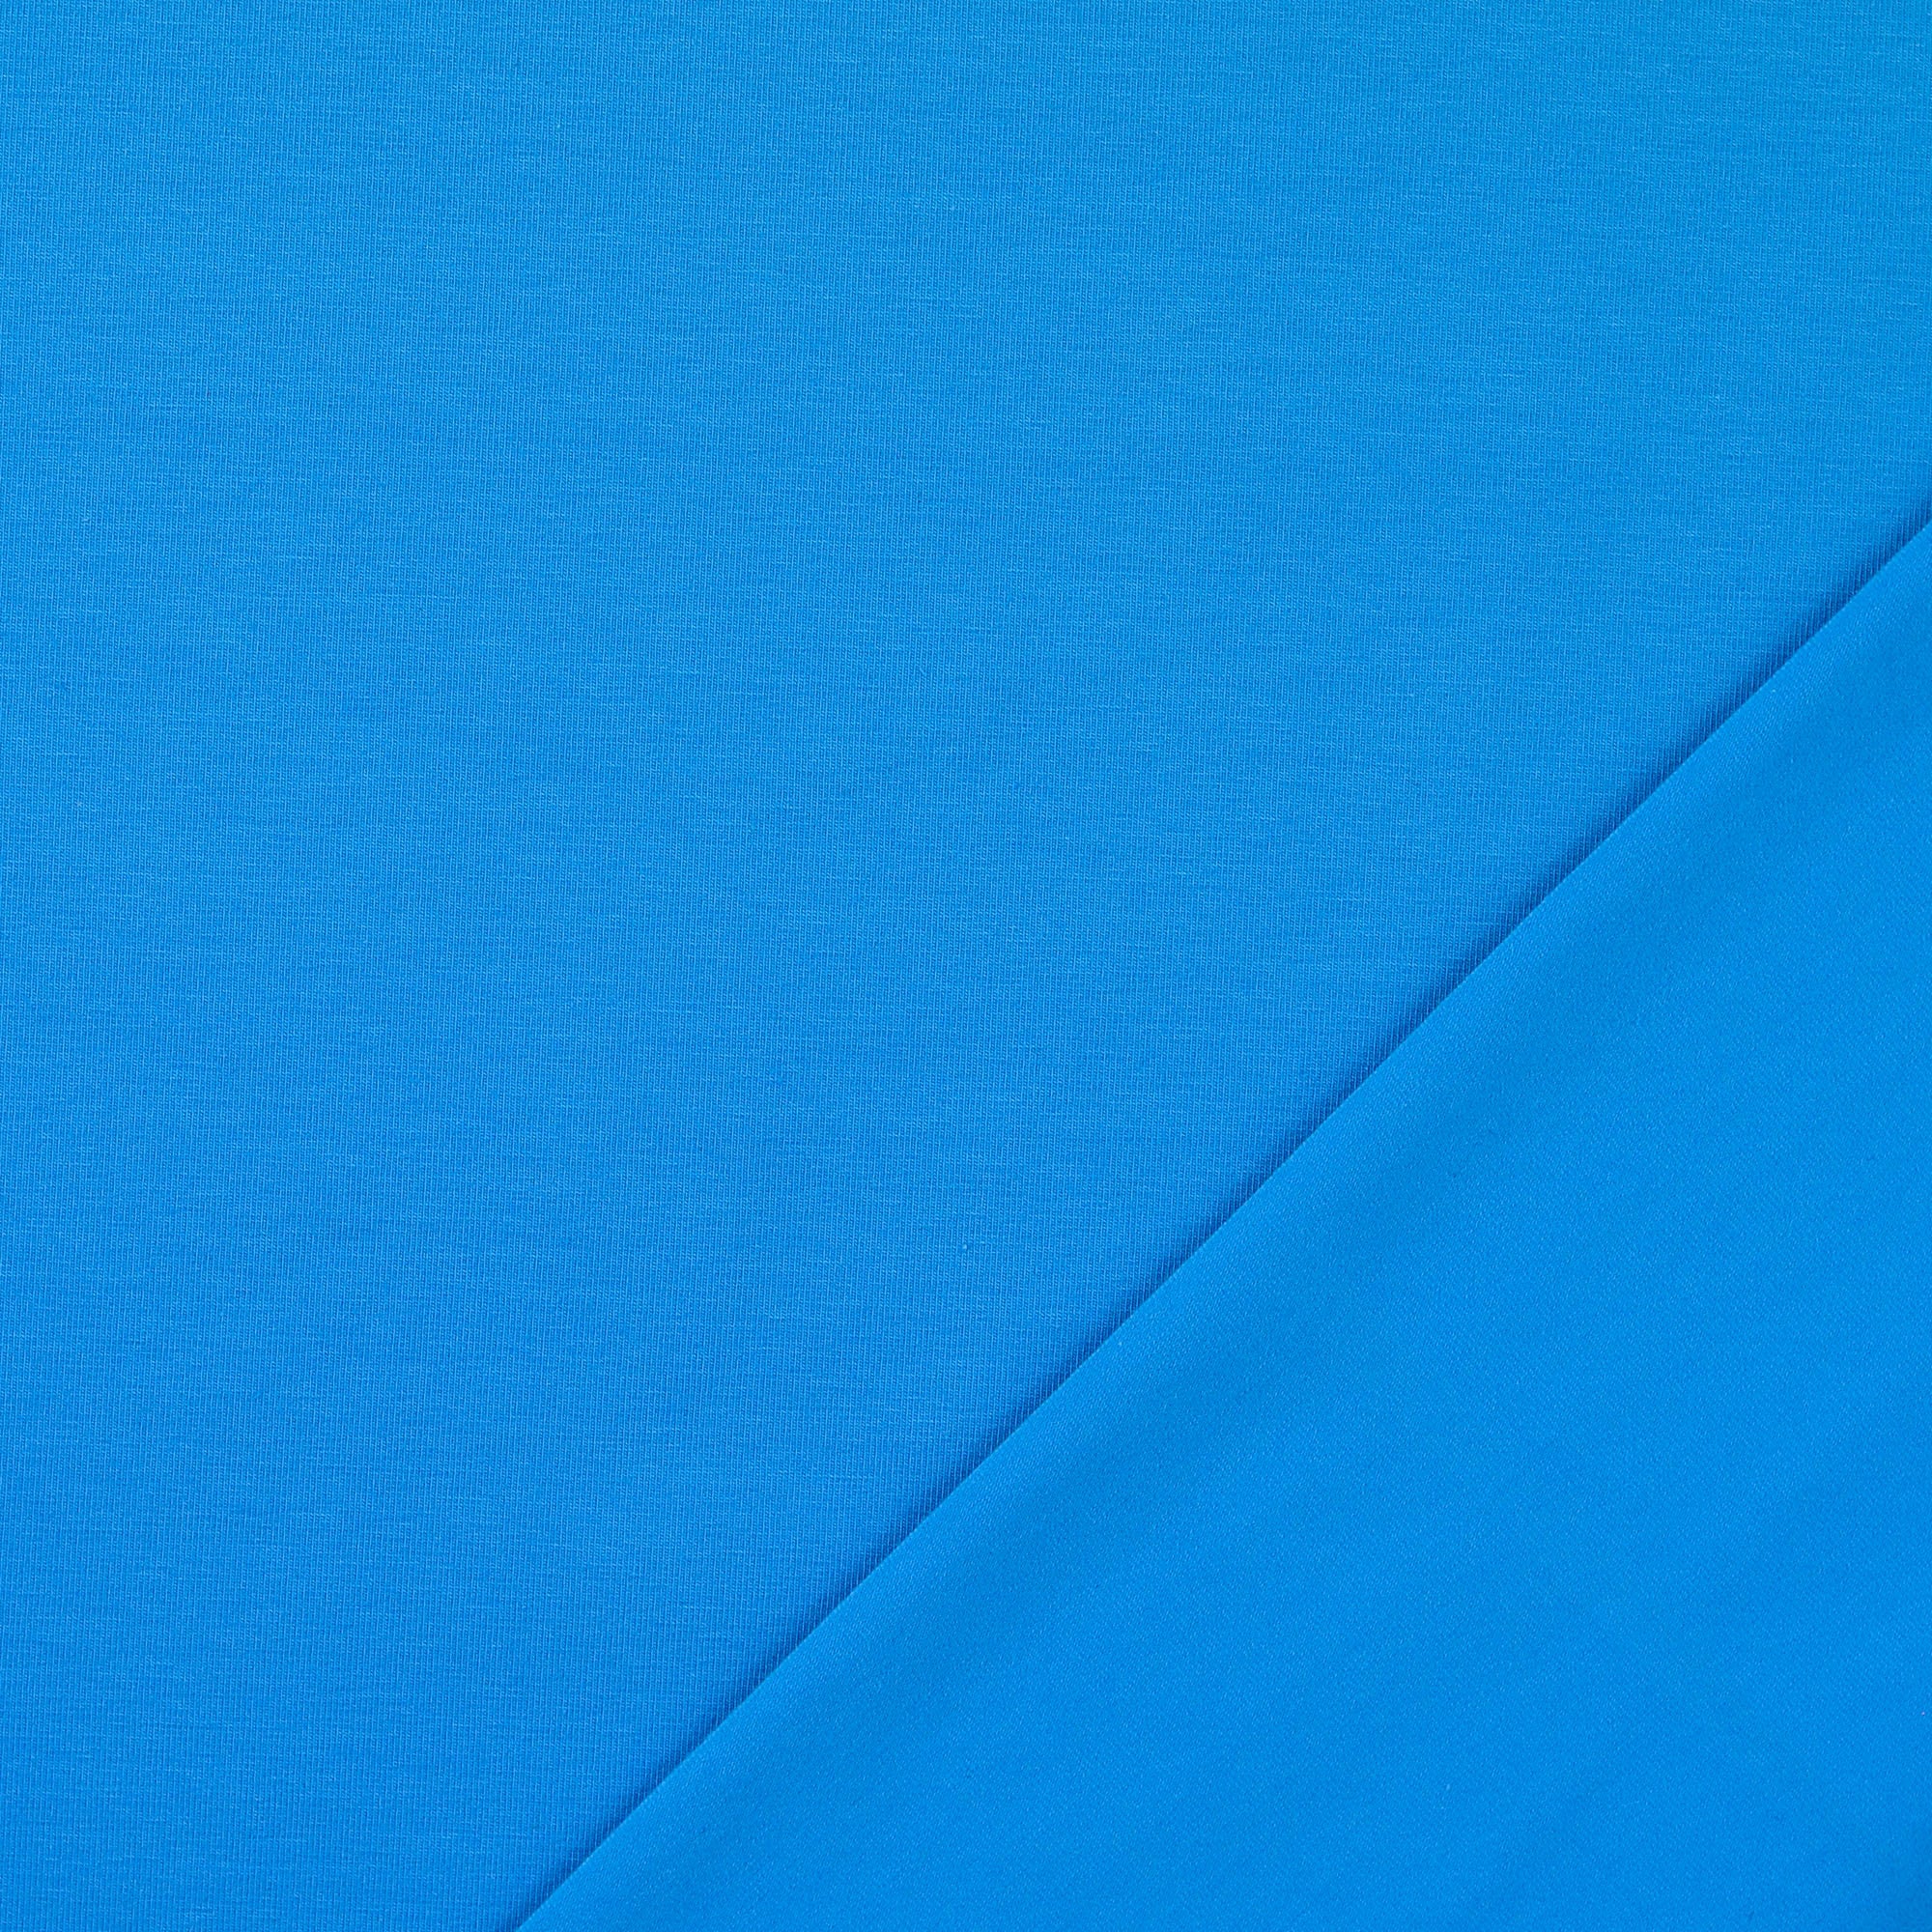 Essential Chic Turquoise Blue Plain Cotton Jersey Fabric